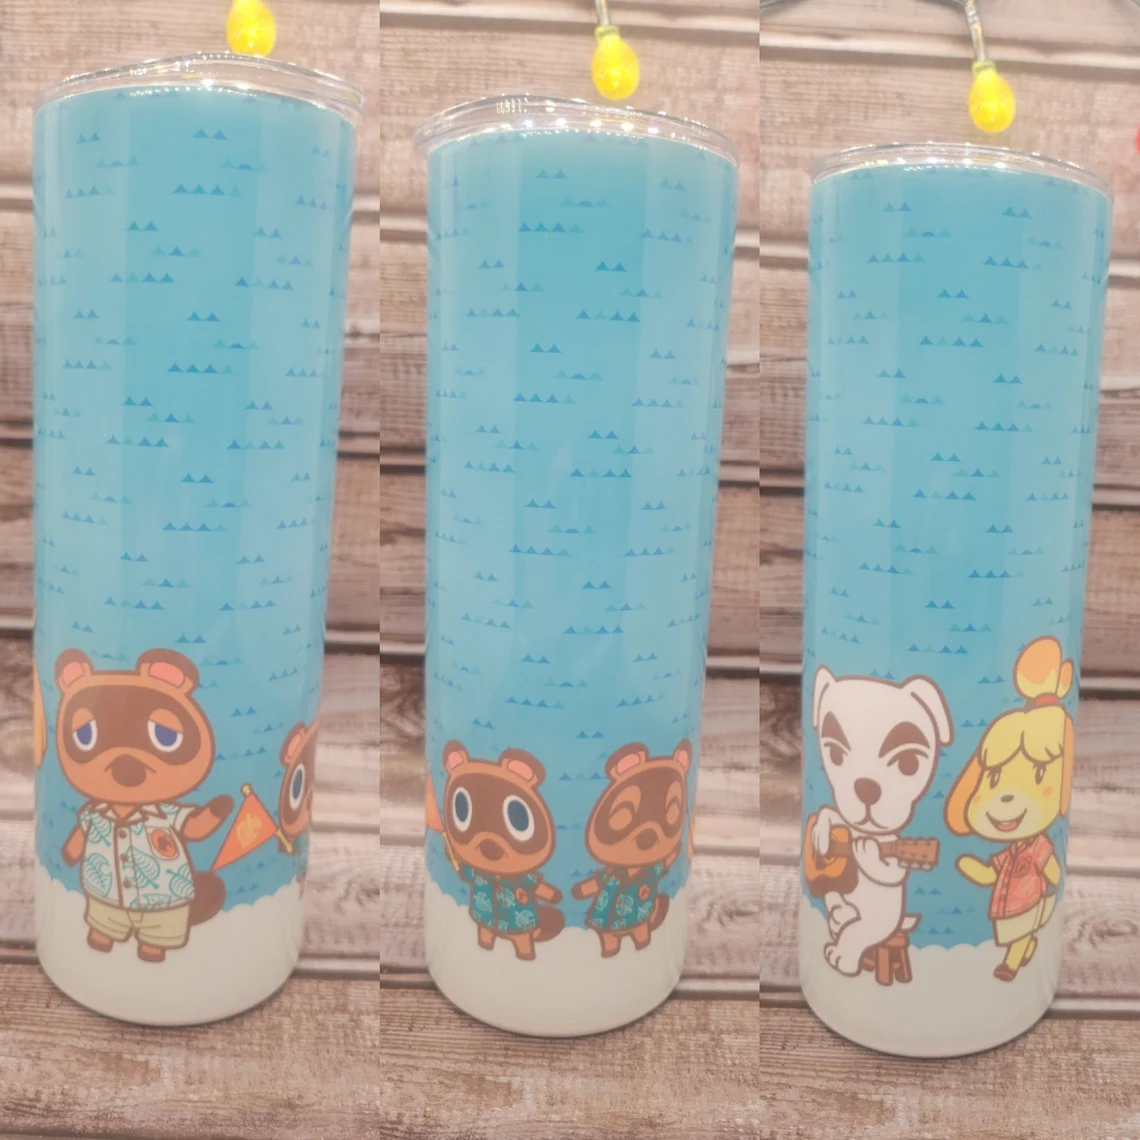 Animal Crossing: New Horizons Tumbler cup Island Residents ver